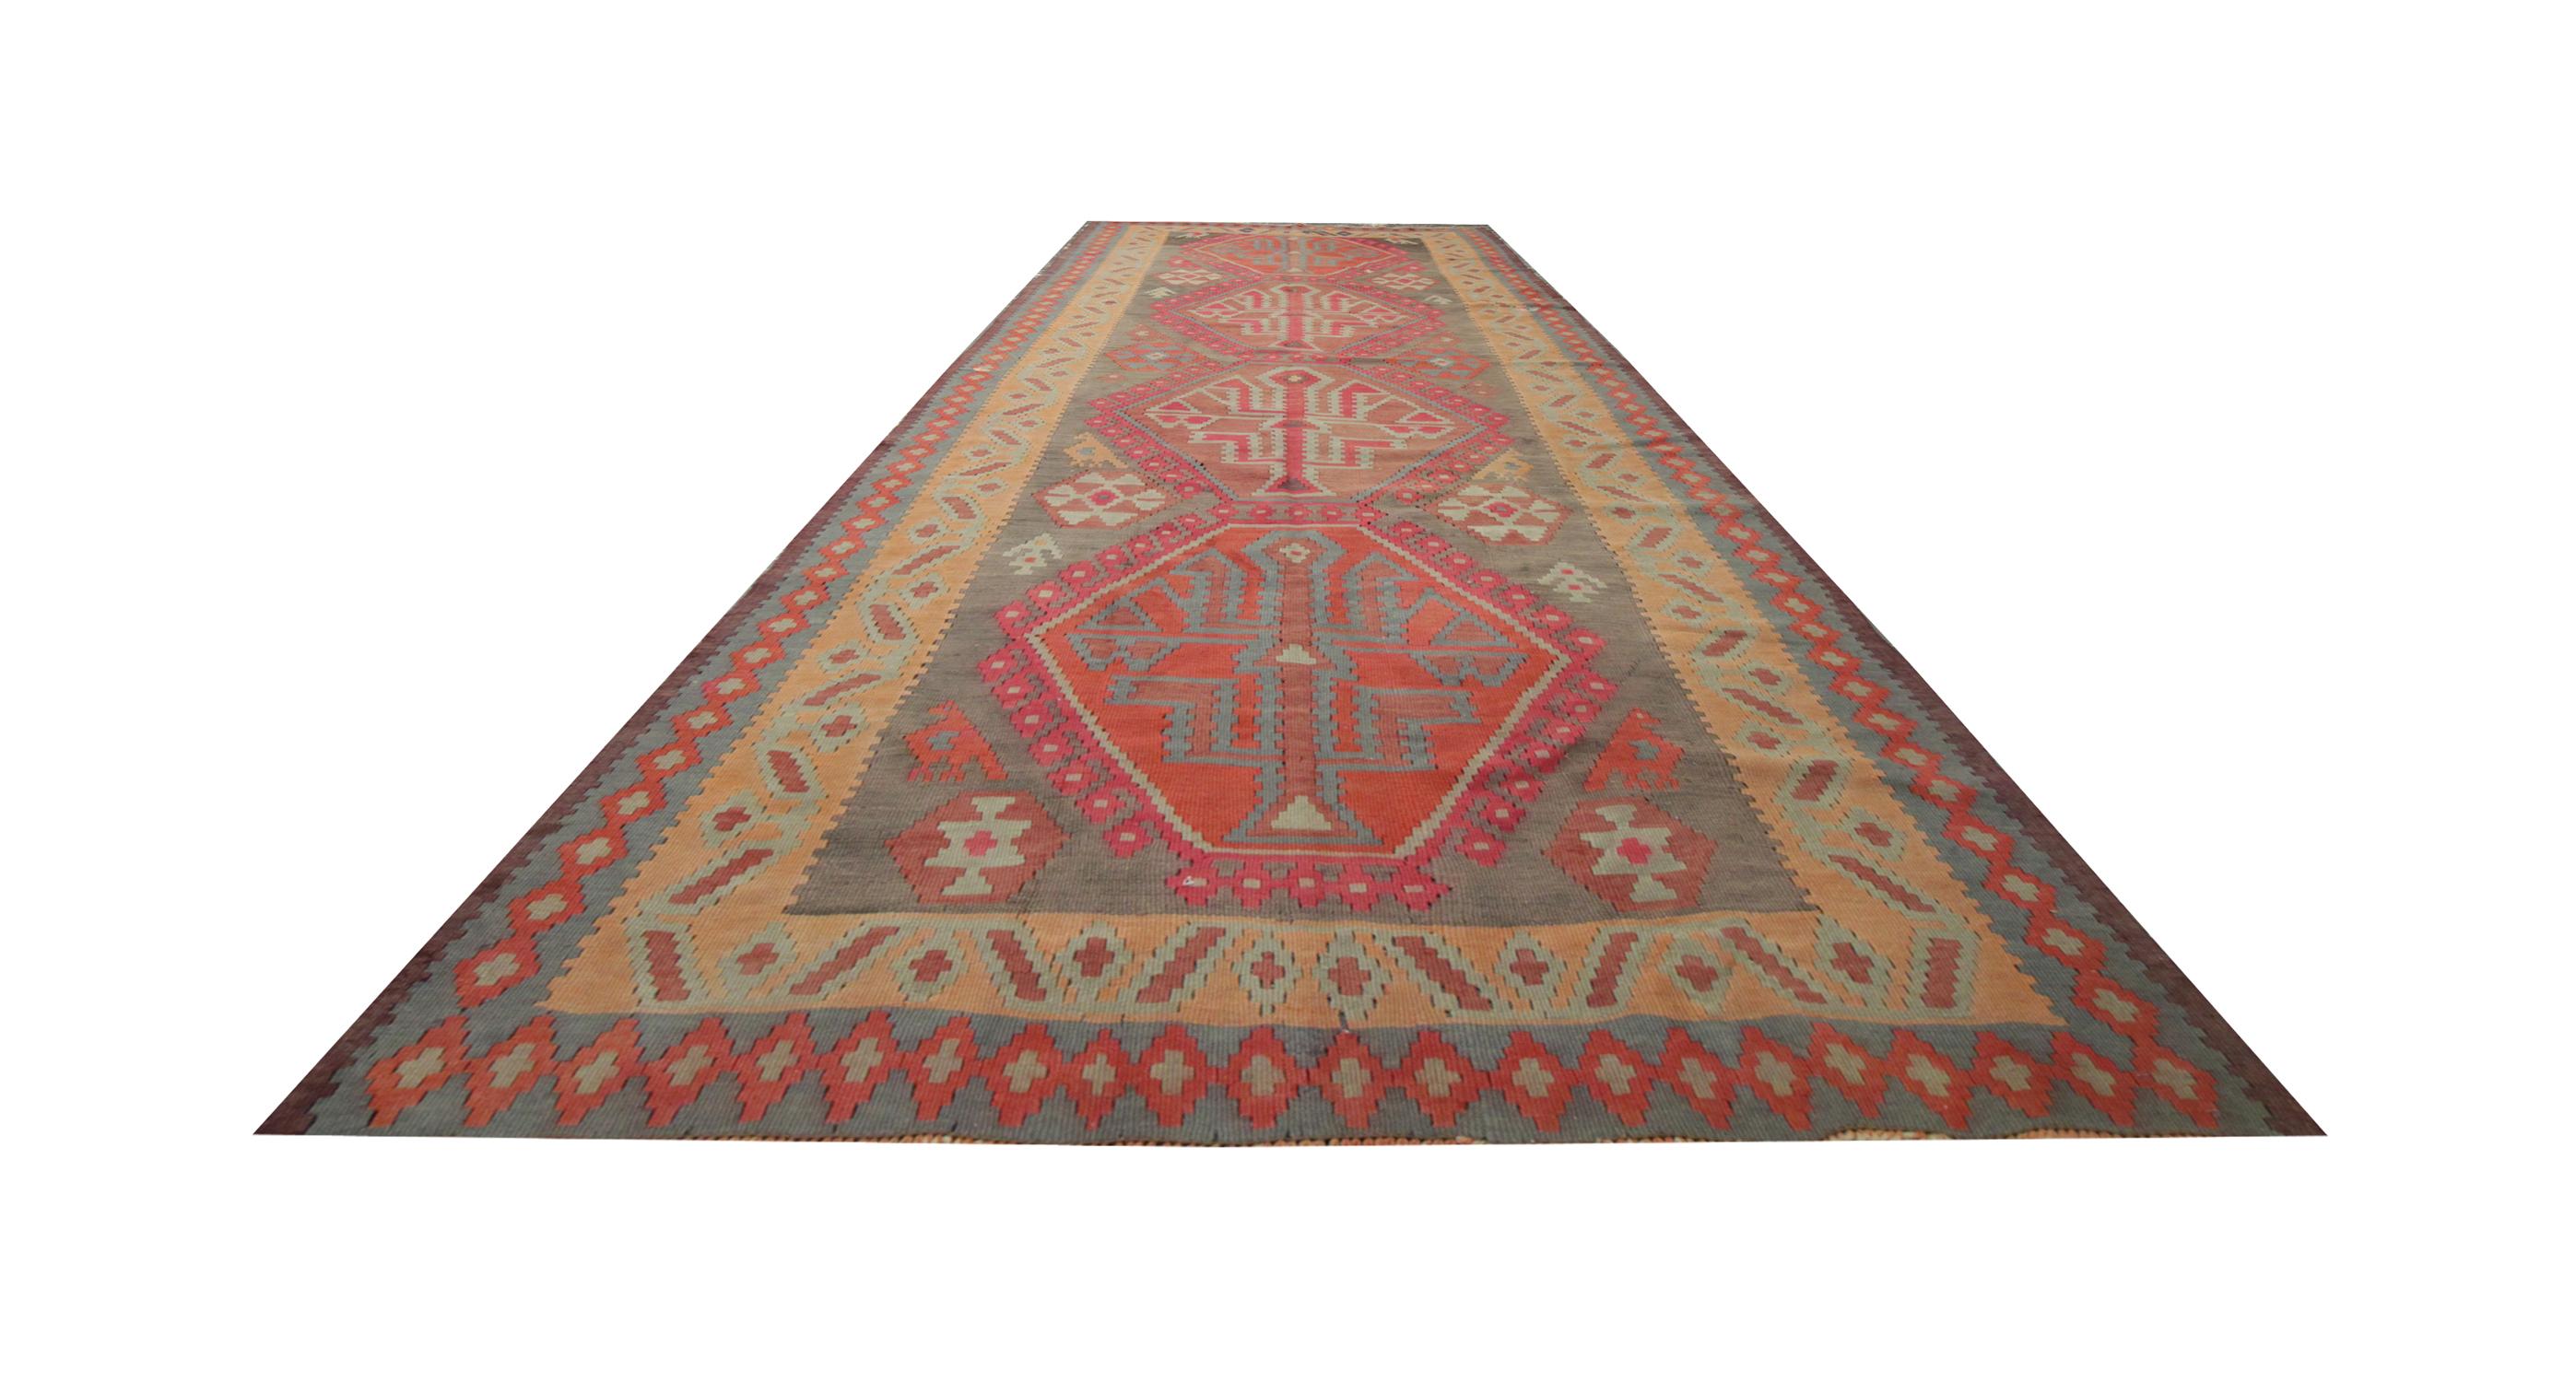 This fine wool rug is a handwoven Caucasian Kilim rug. Tones of red, orange, green and yellow marry together to form this beautiful geometric design, with symbolic details drawn from nature, leaves and animals. The colours and patterns in this rug